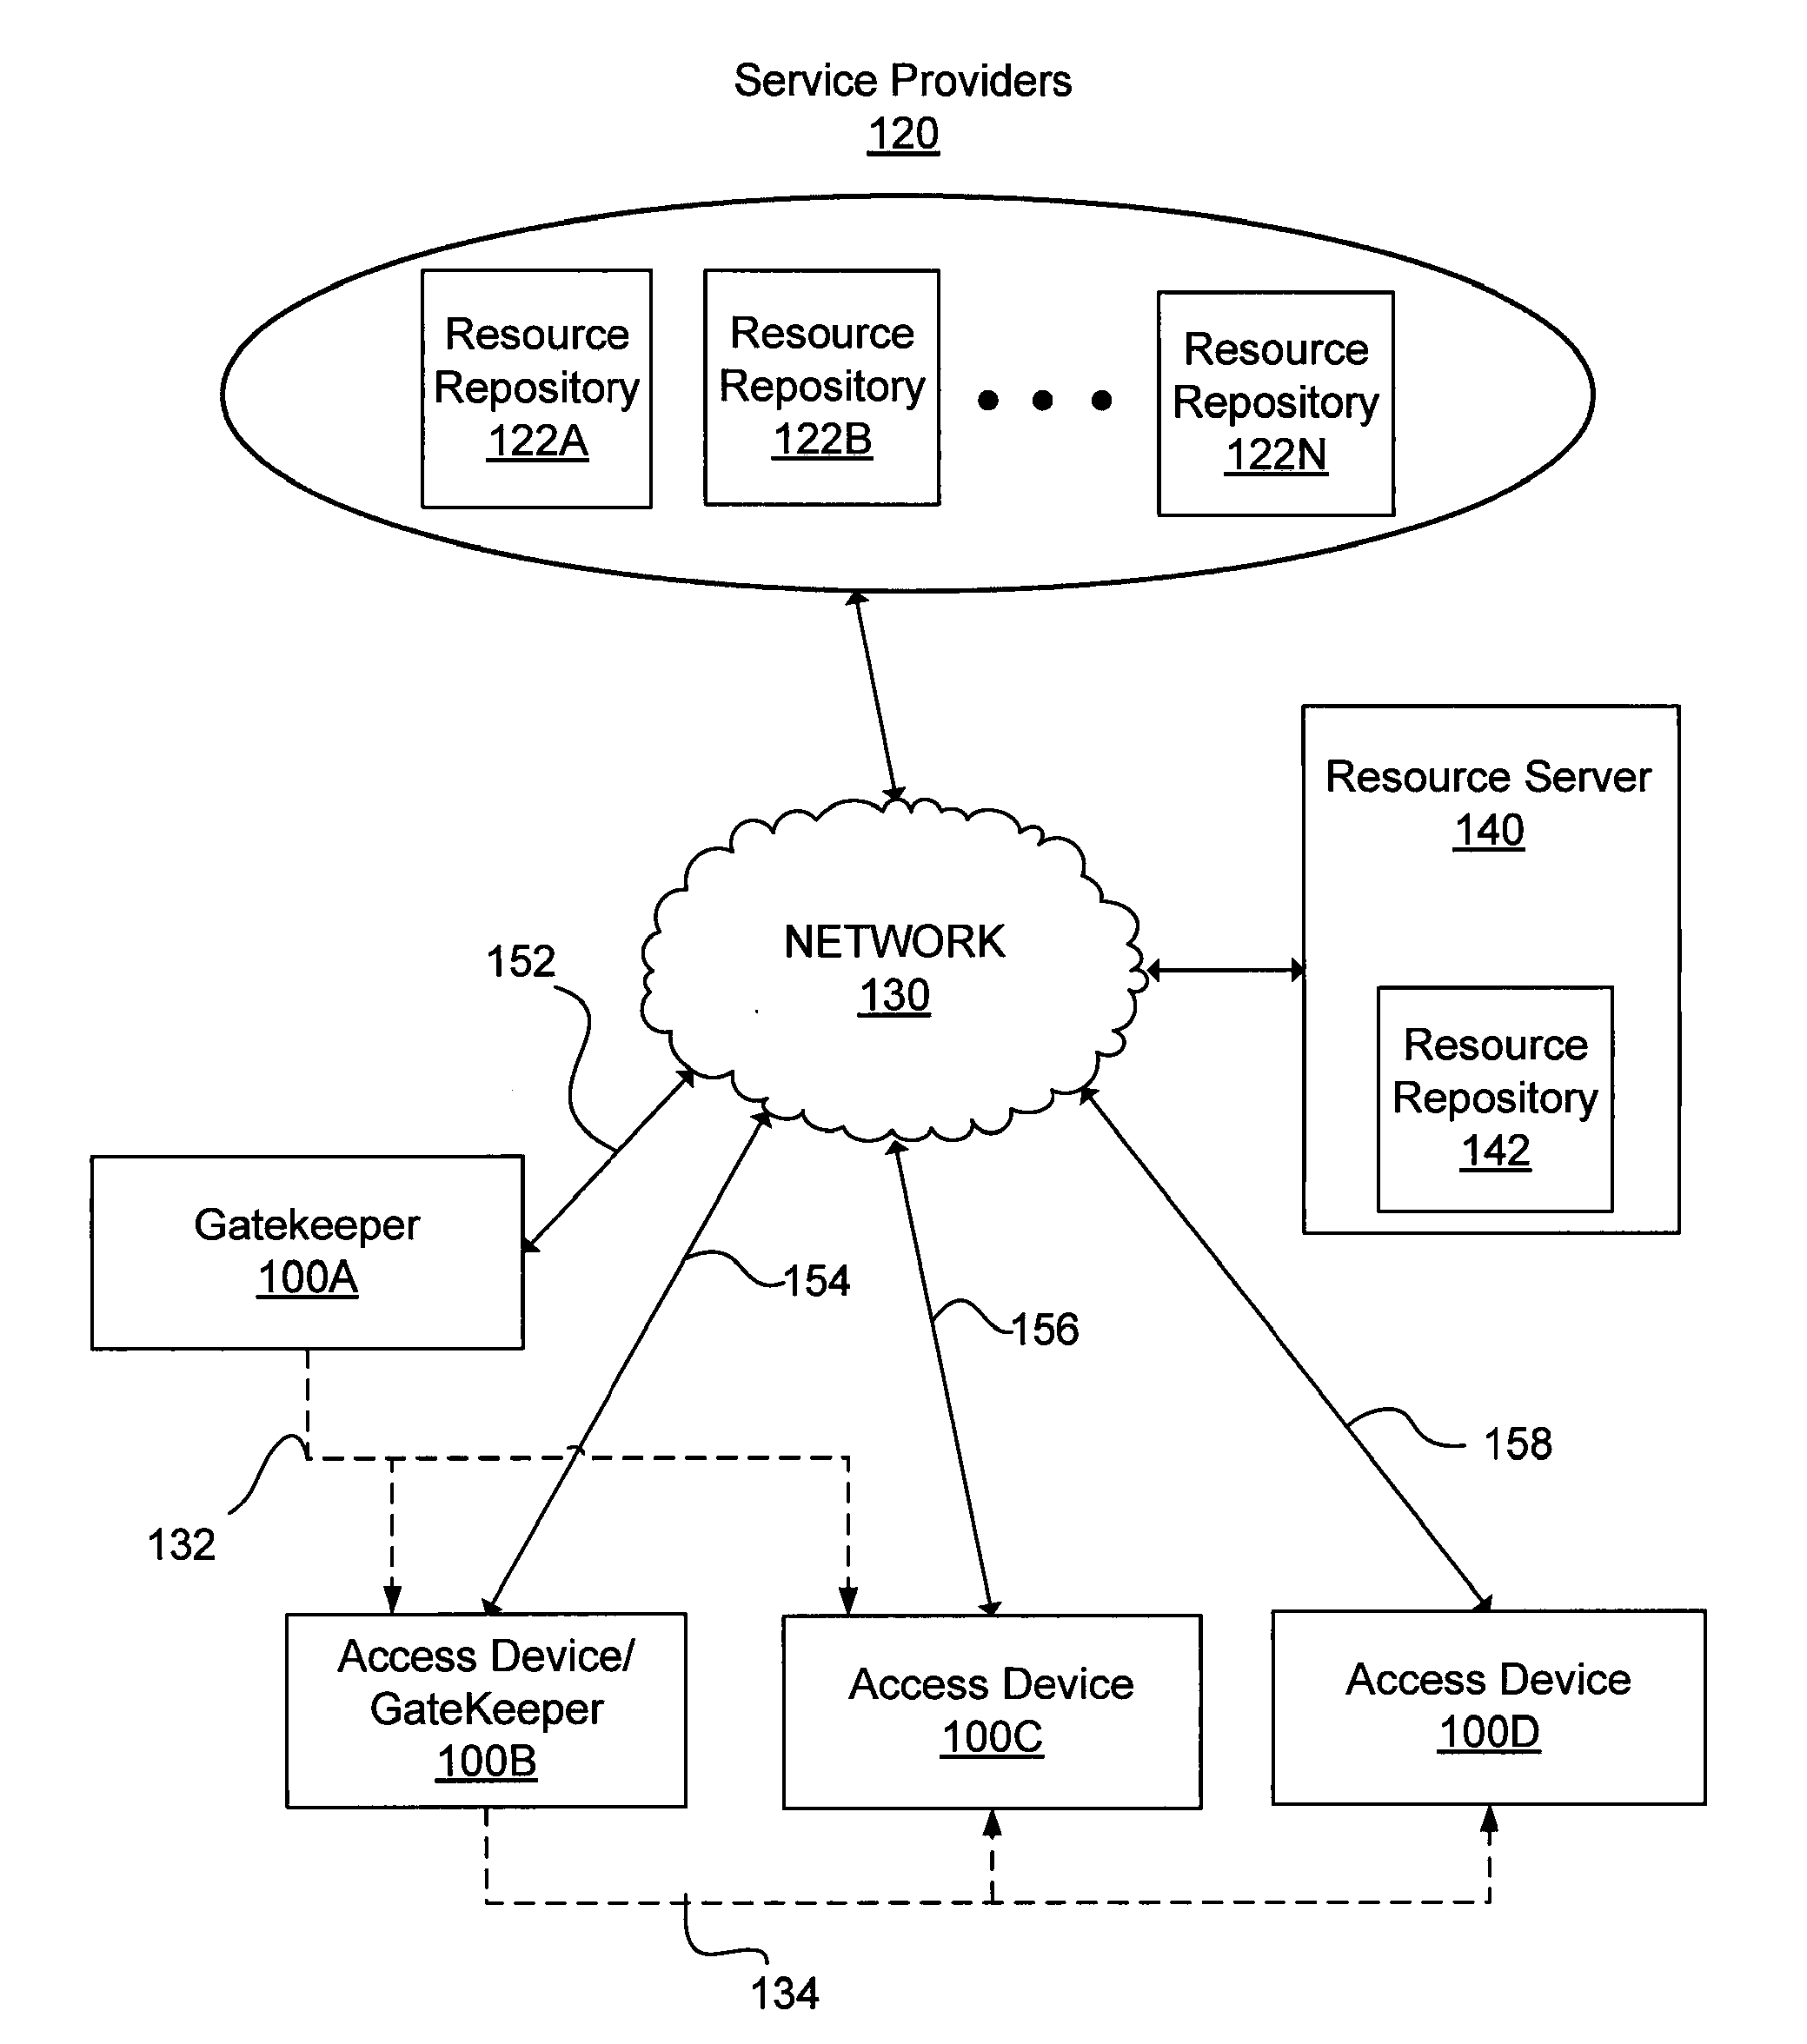 Delegating or Transferring of Access to Resources Between Multiple Devices